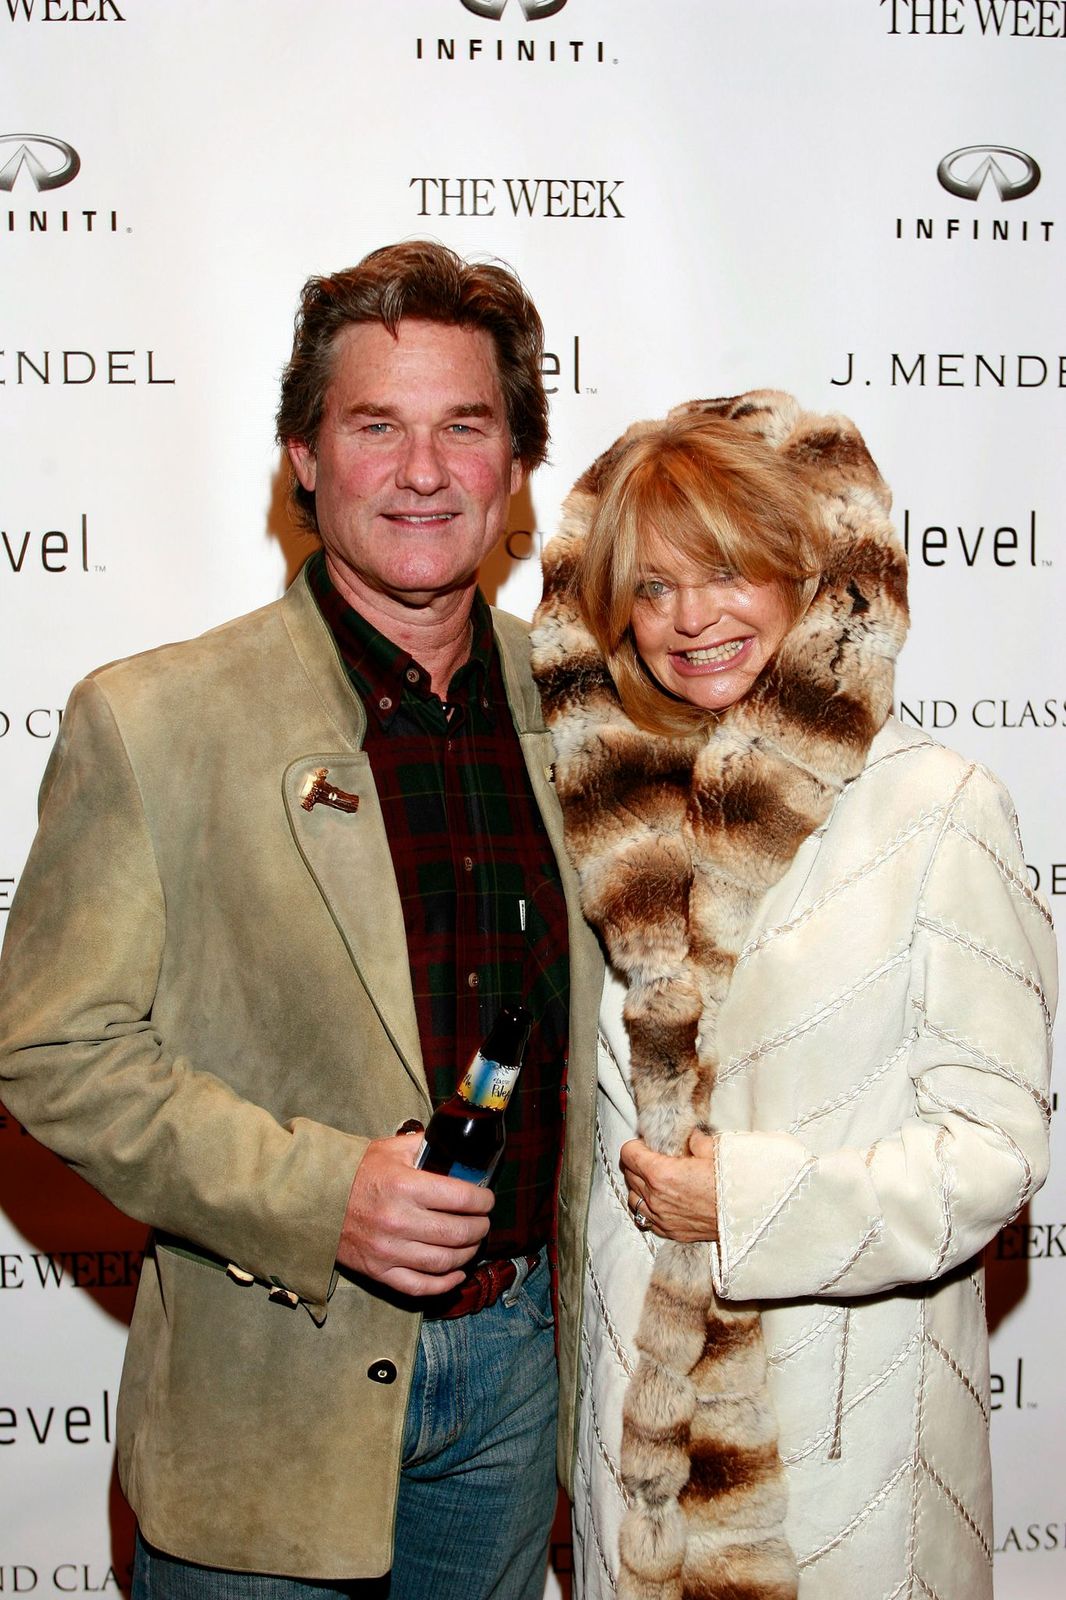 Kurt Russell and Goldie Hawn at the screening of "To Kill a Mockingbird" on December 29, 2005, in Aspen, Colorado | Photo: Riccardo S. Savi/Grand Classics/Getty Images